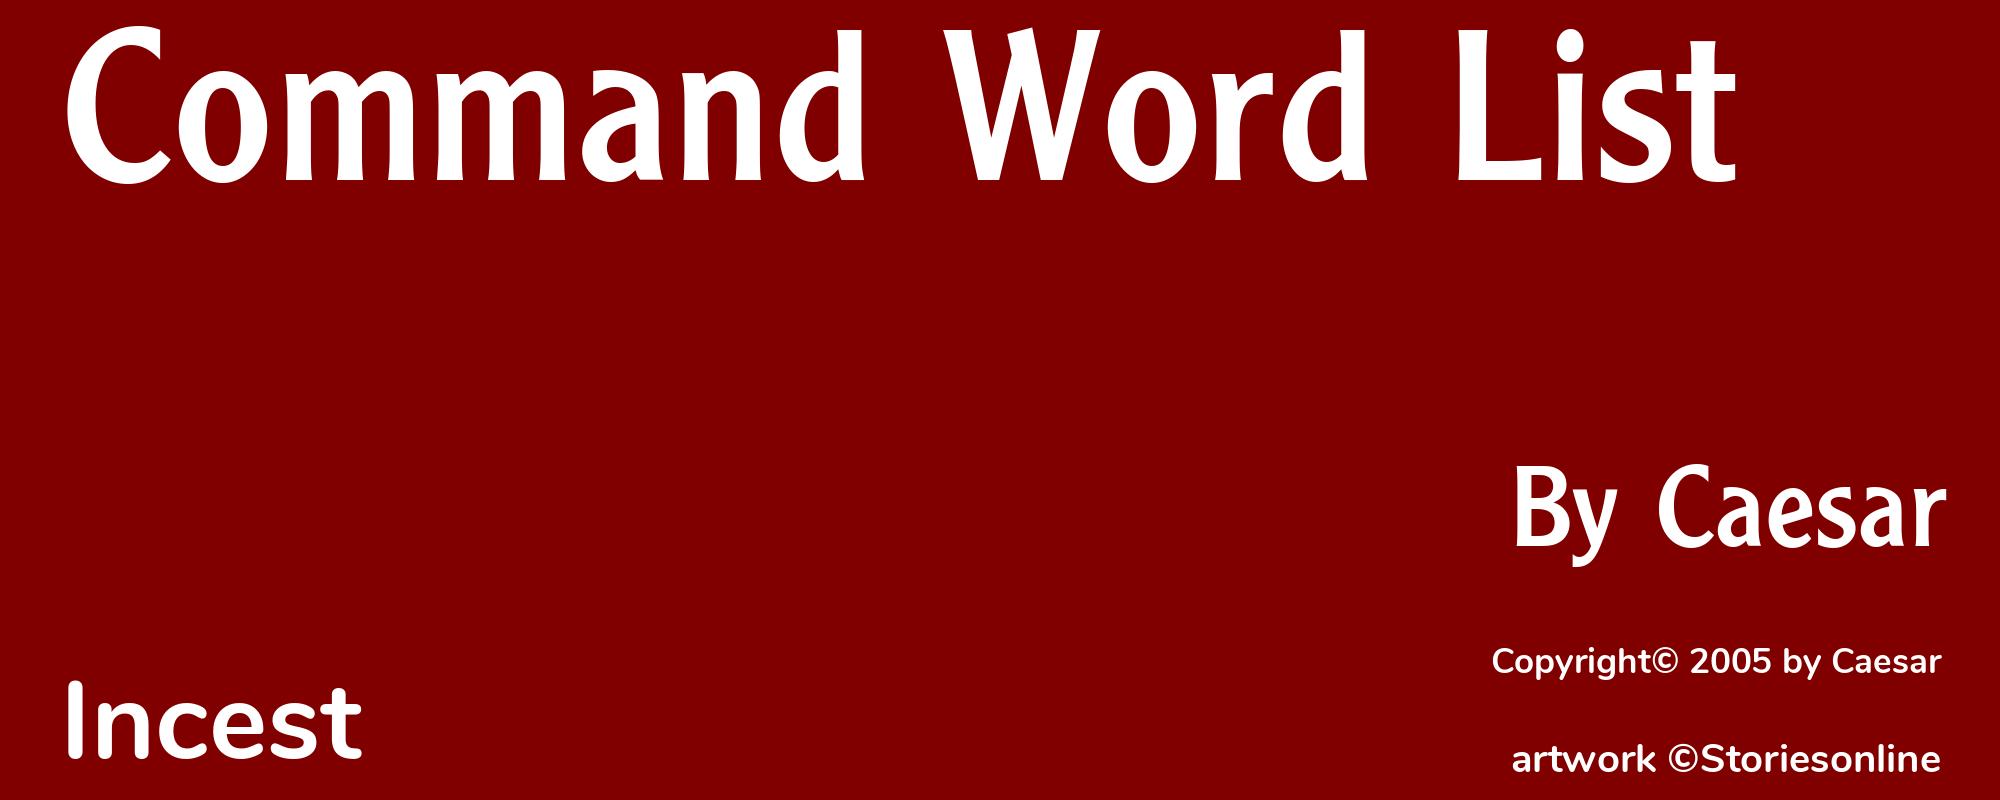 Command Word List - Cover